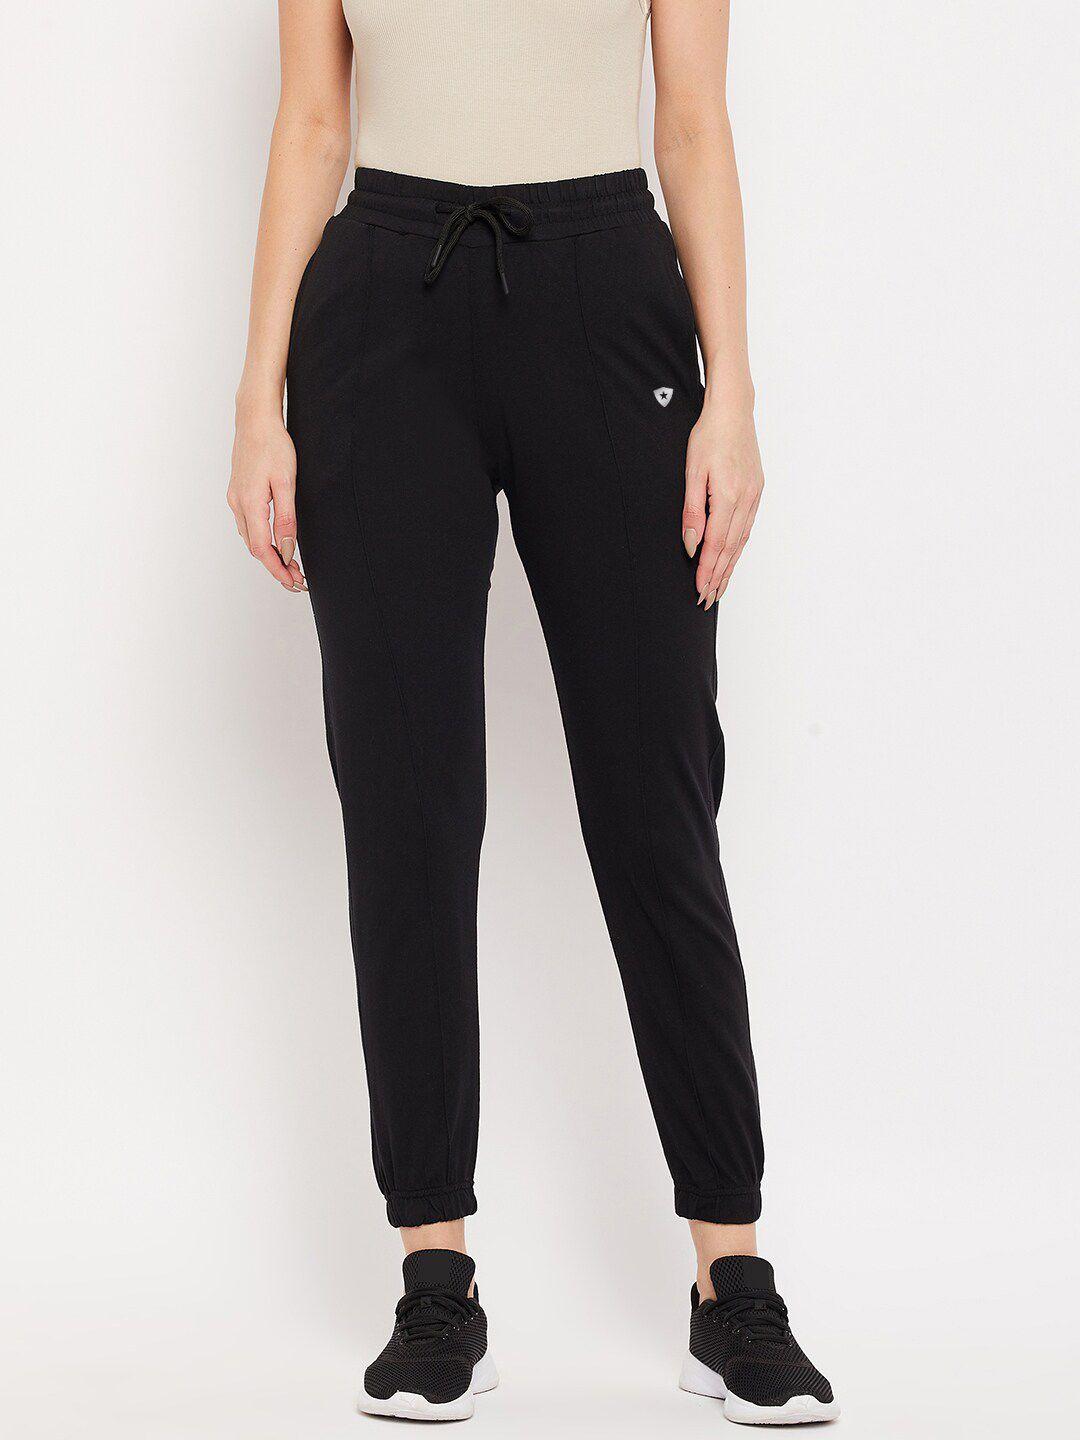 french flexious women black solid dry-fit joggers